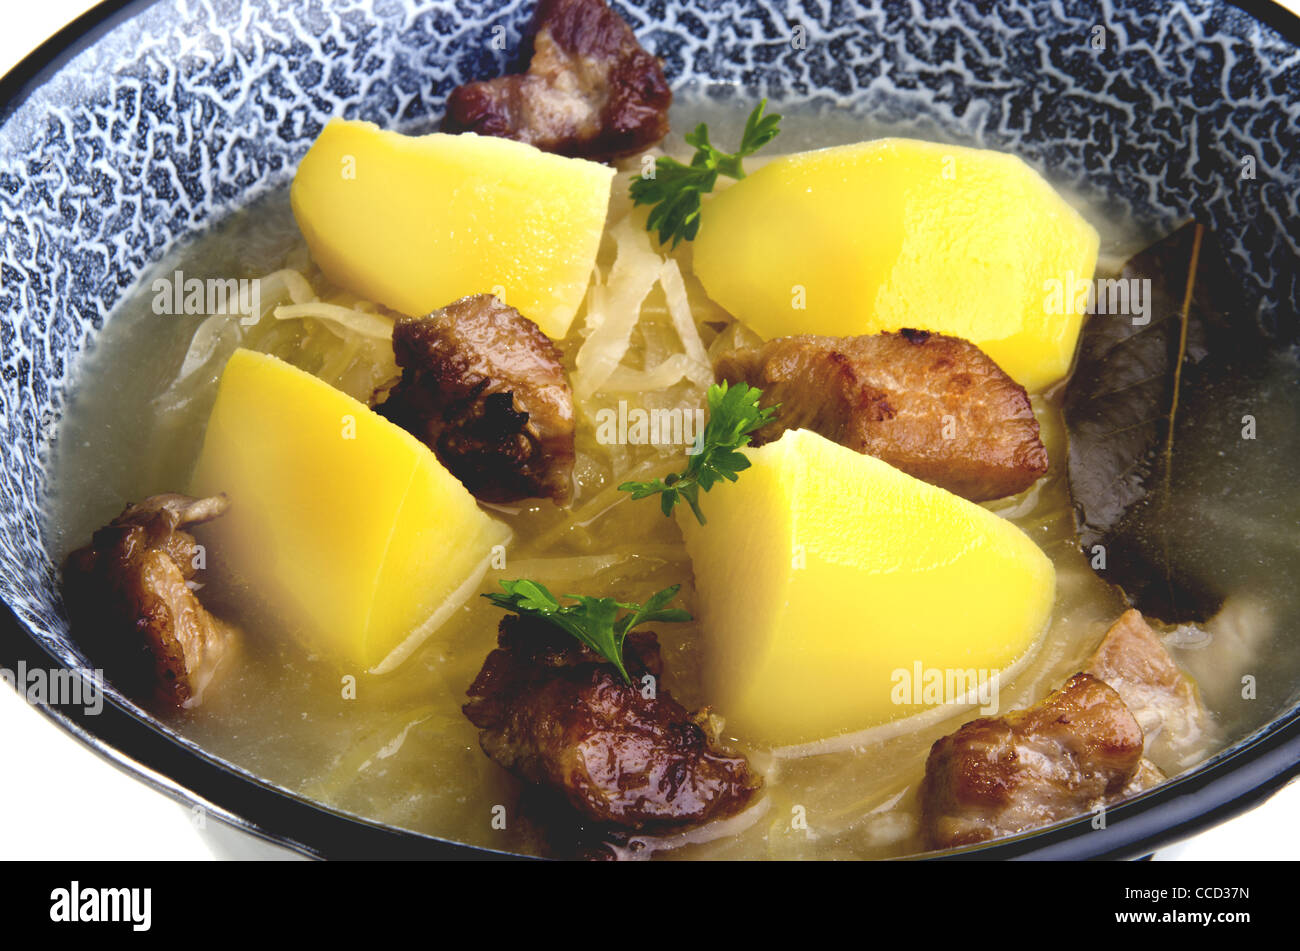 Sauerkraut soup with grilled meat and boiled potatoes Stock Photo